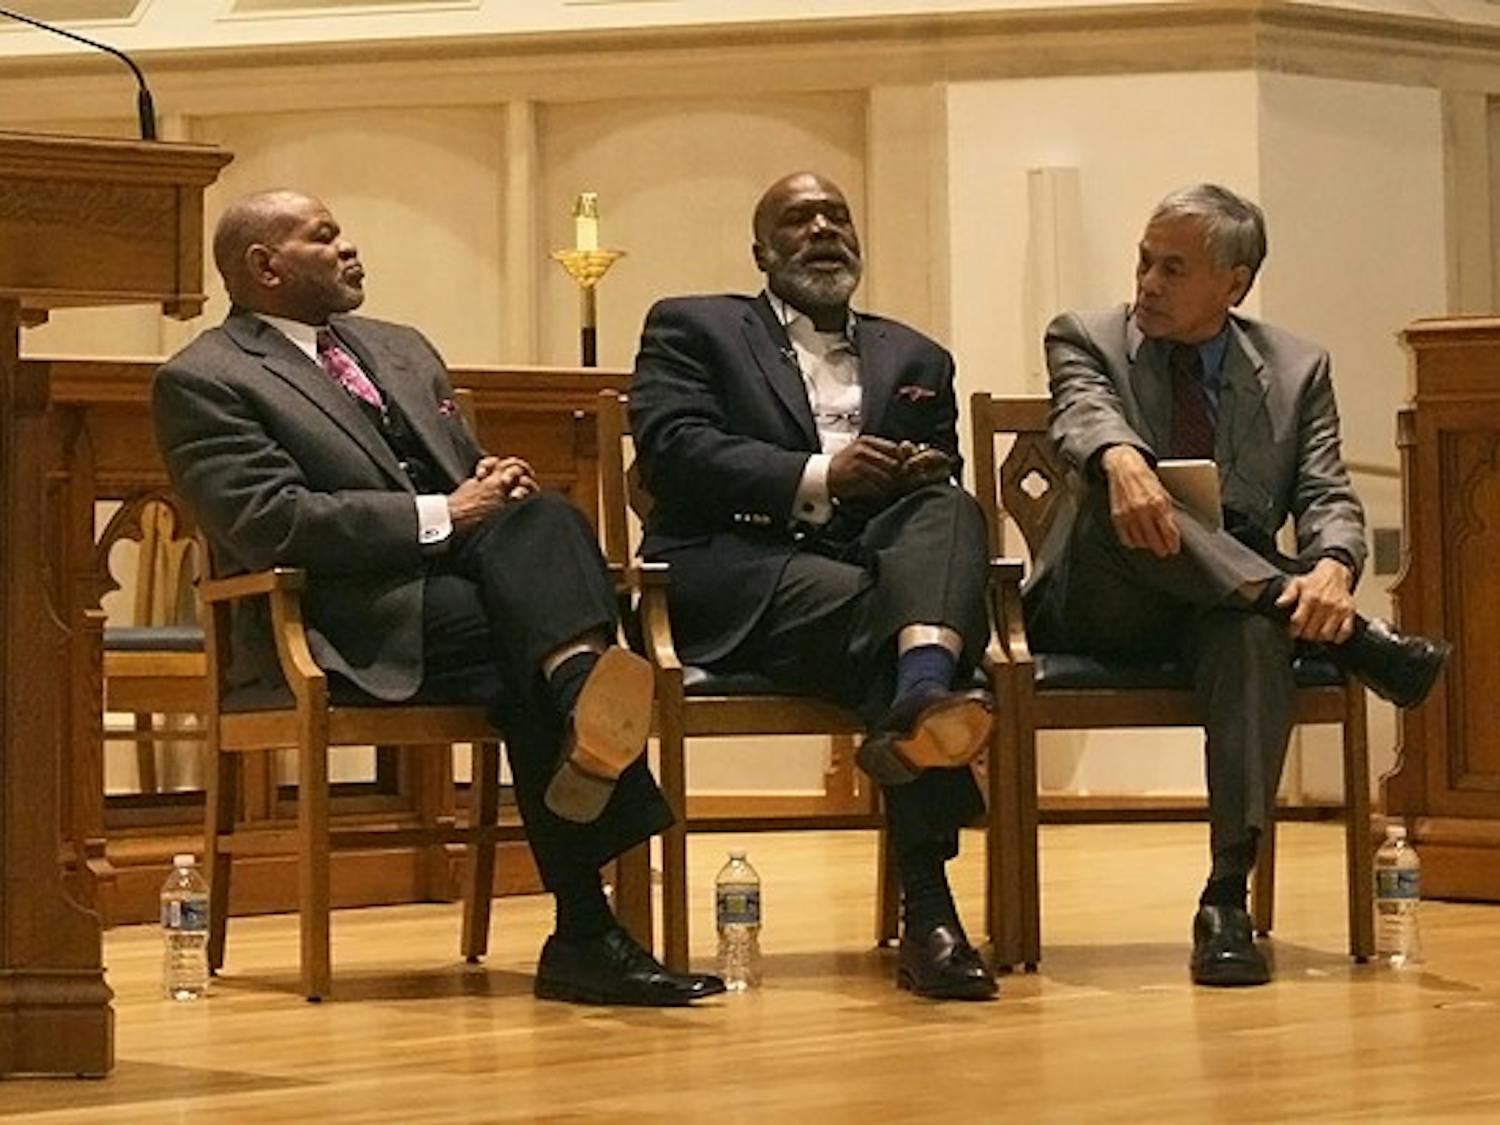 Three religious experts discuss linking black Christian and Muslim congregations through interfaith dialogue in a Divinity School event Monday evening.